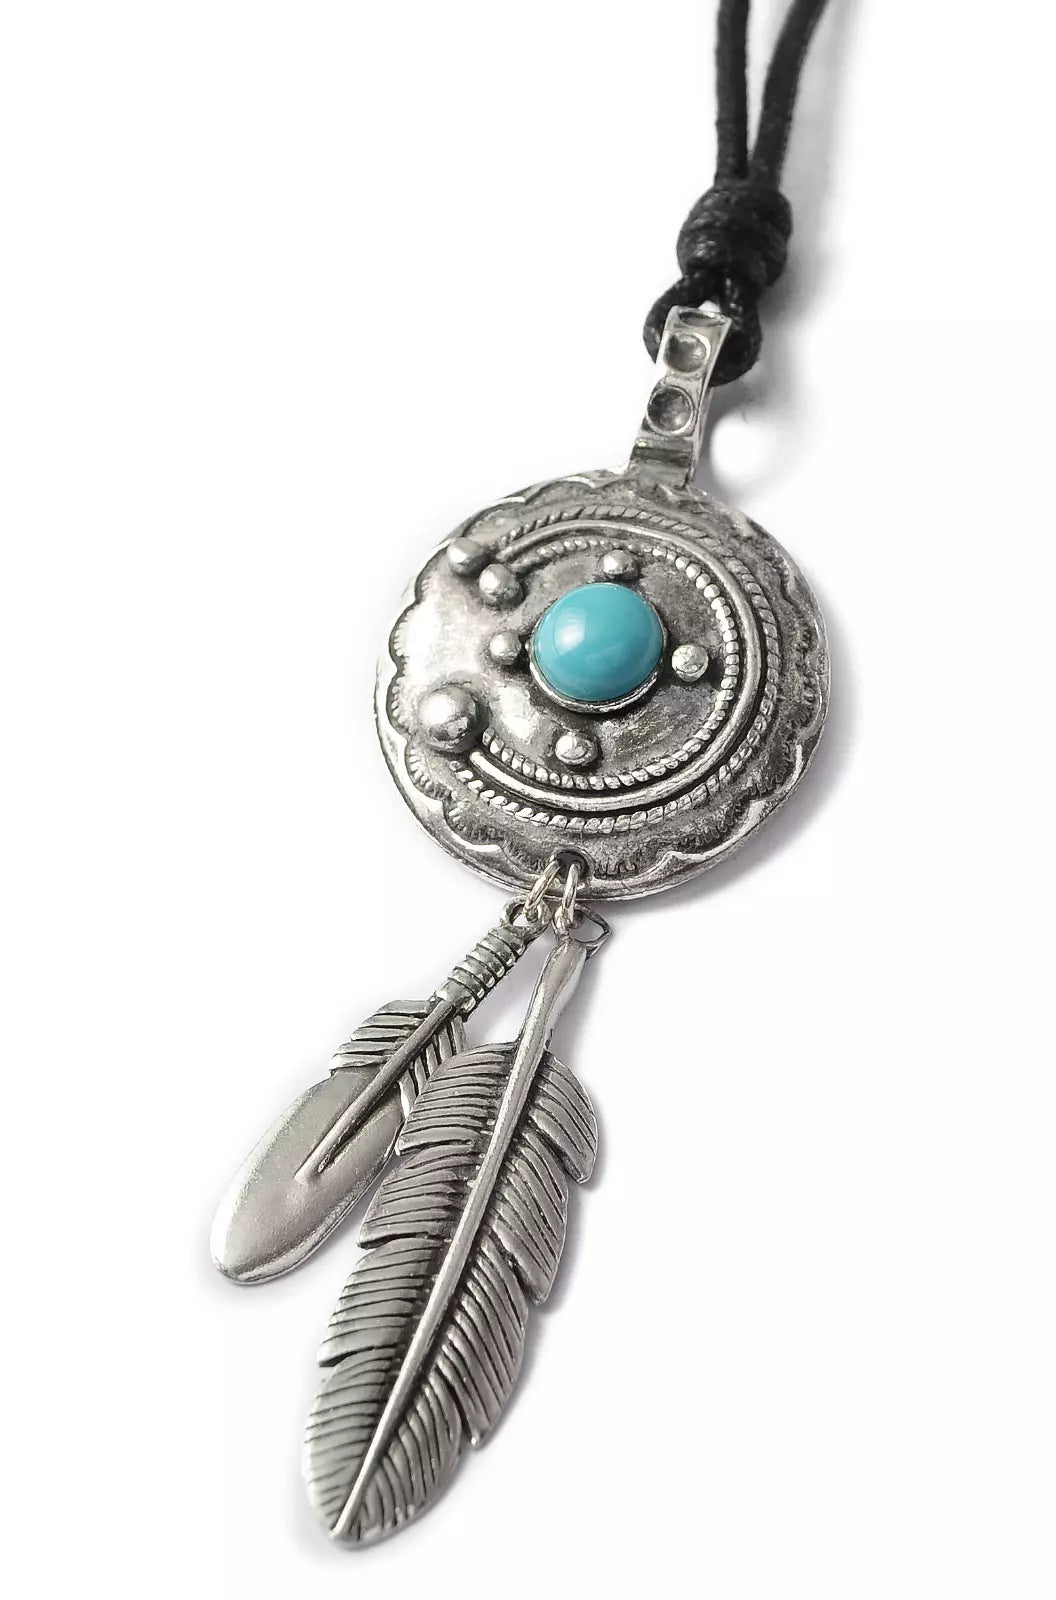 Lovely Native American Indian Silver Pewter Charm Necklace Pendant Jewelry